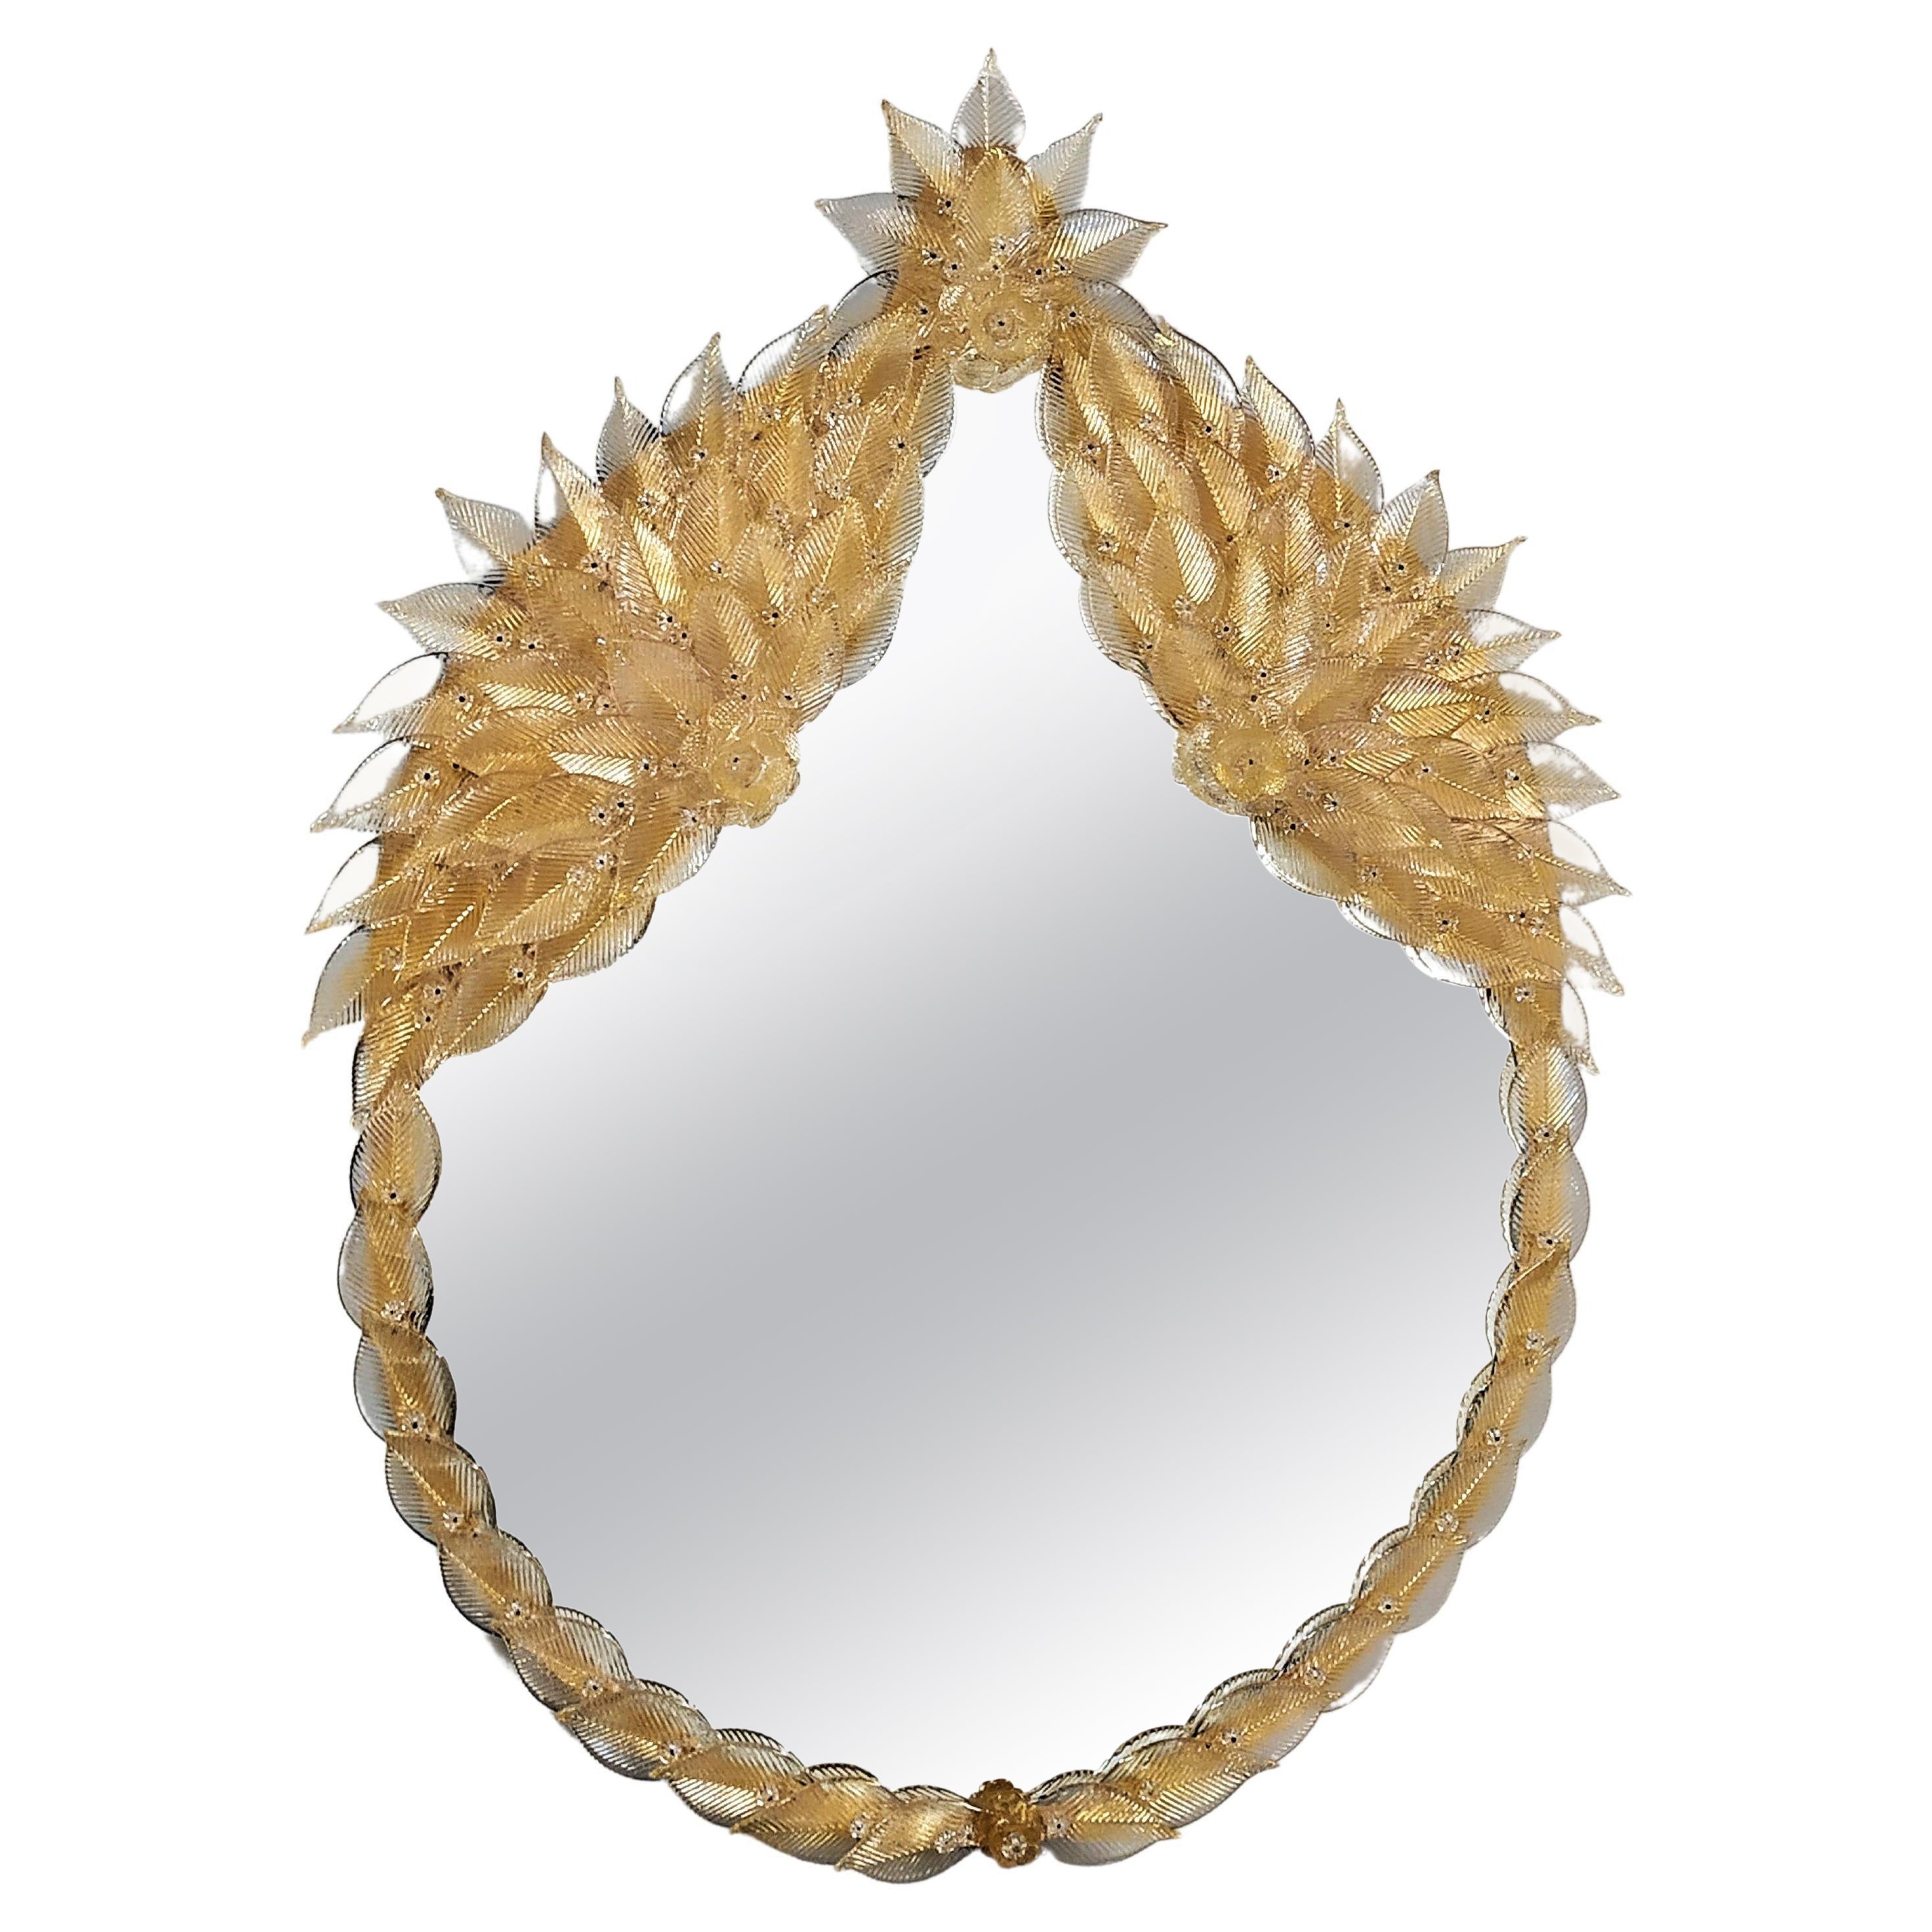 "Impero", Murano Glass Mirror in Venetian Style, Handmade by Fratelli Tosi For Sale